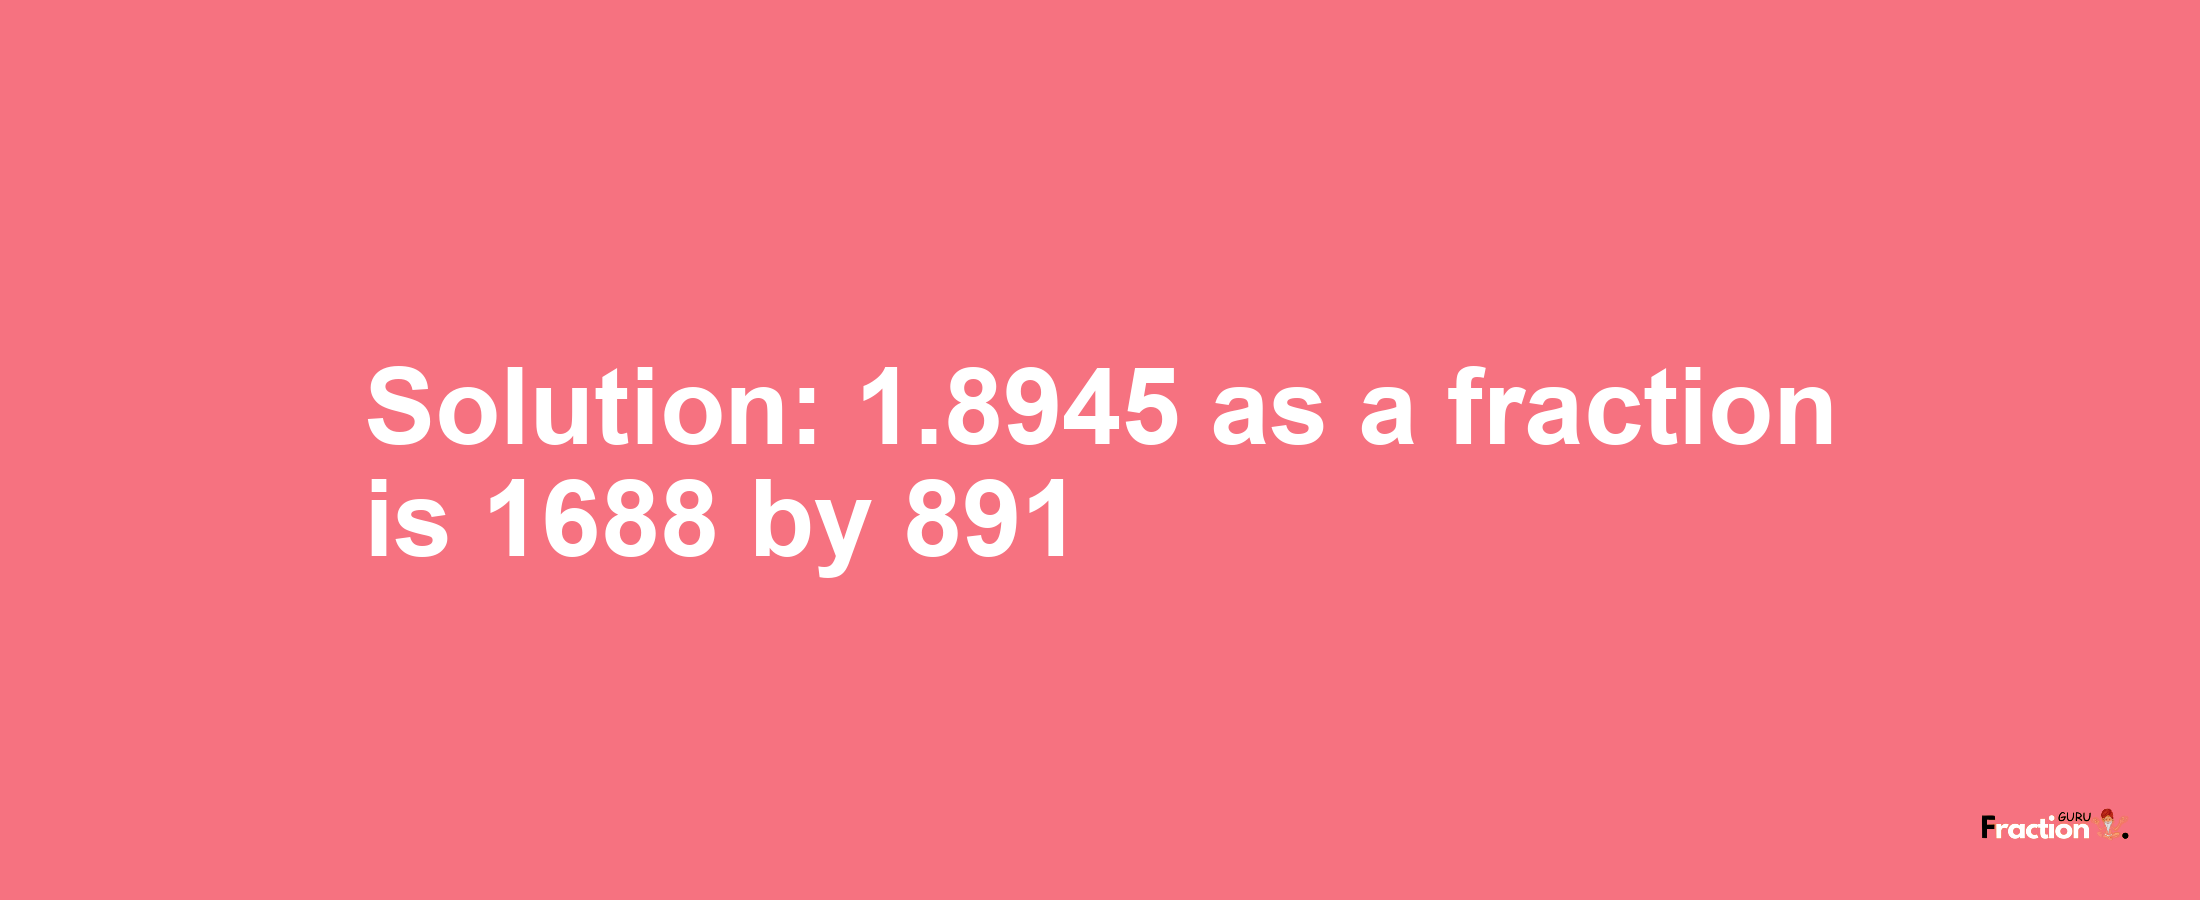 Solution:1.8945 as a fraction is 1688/891